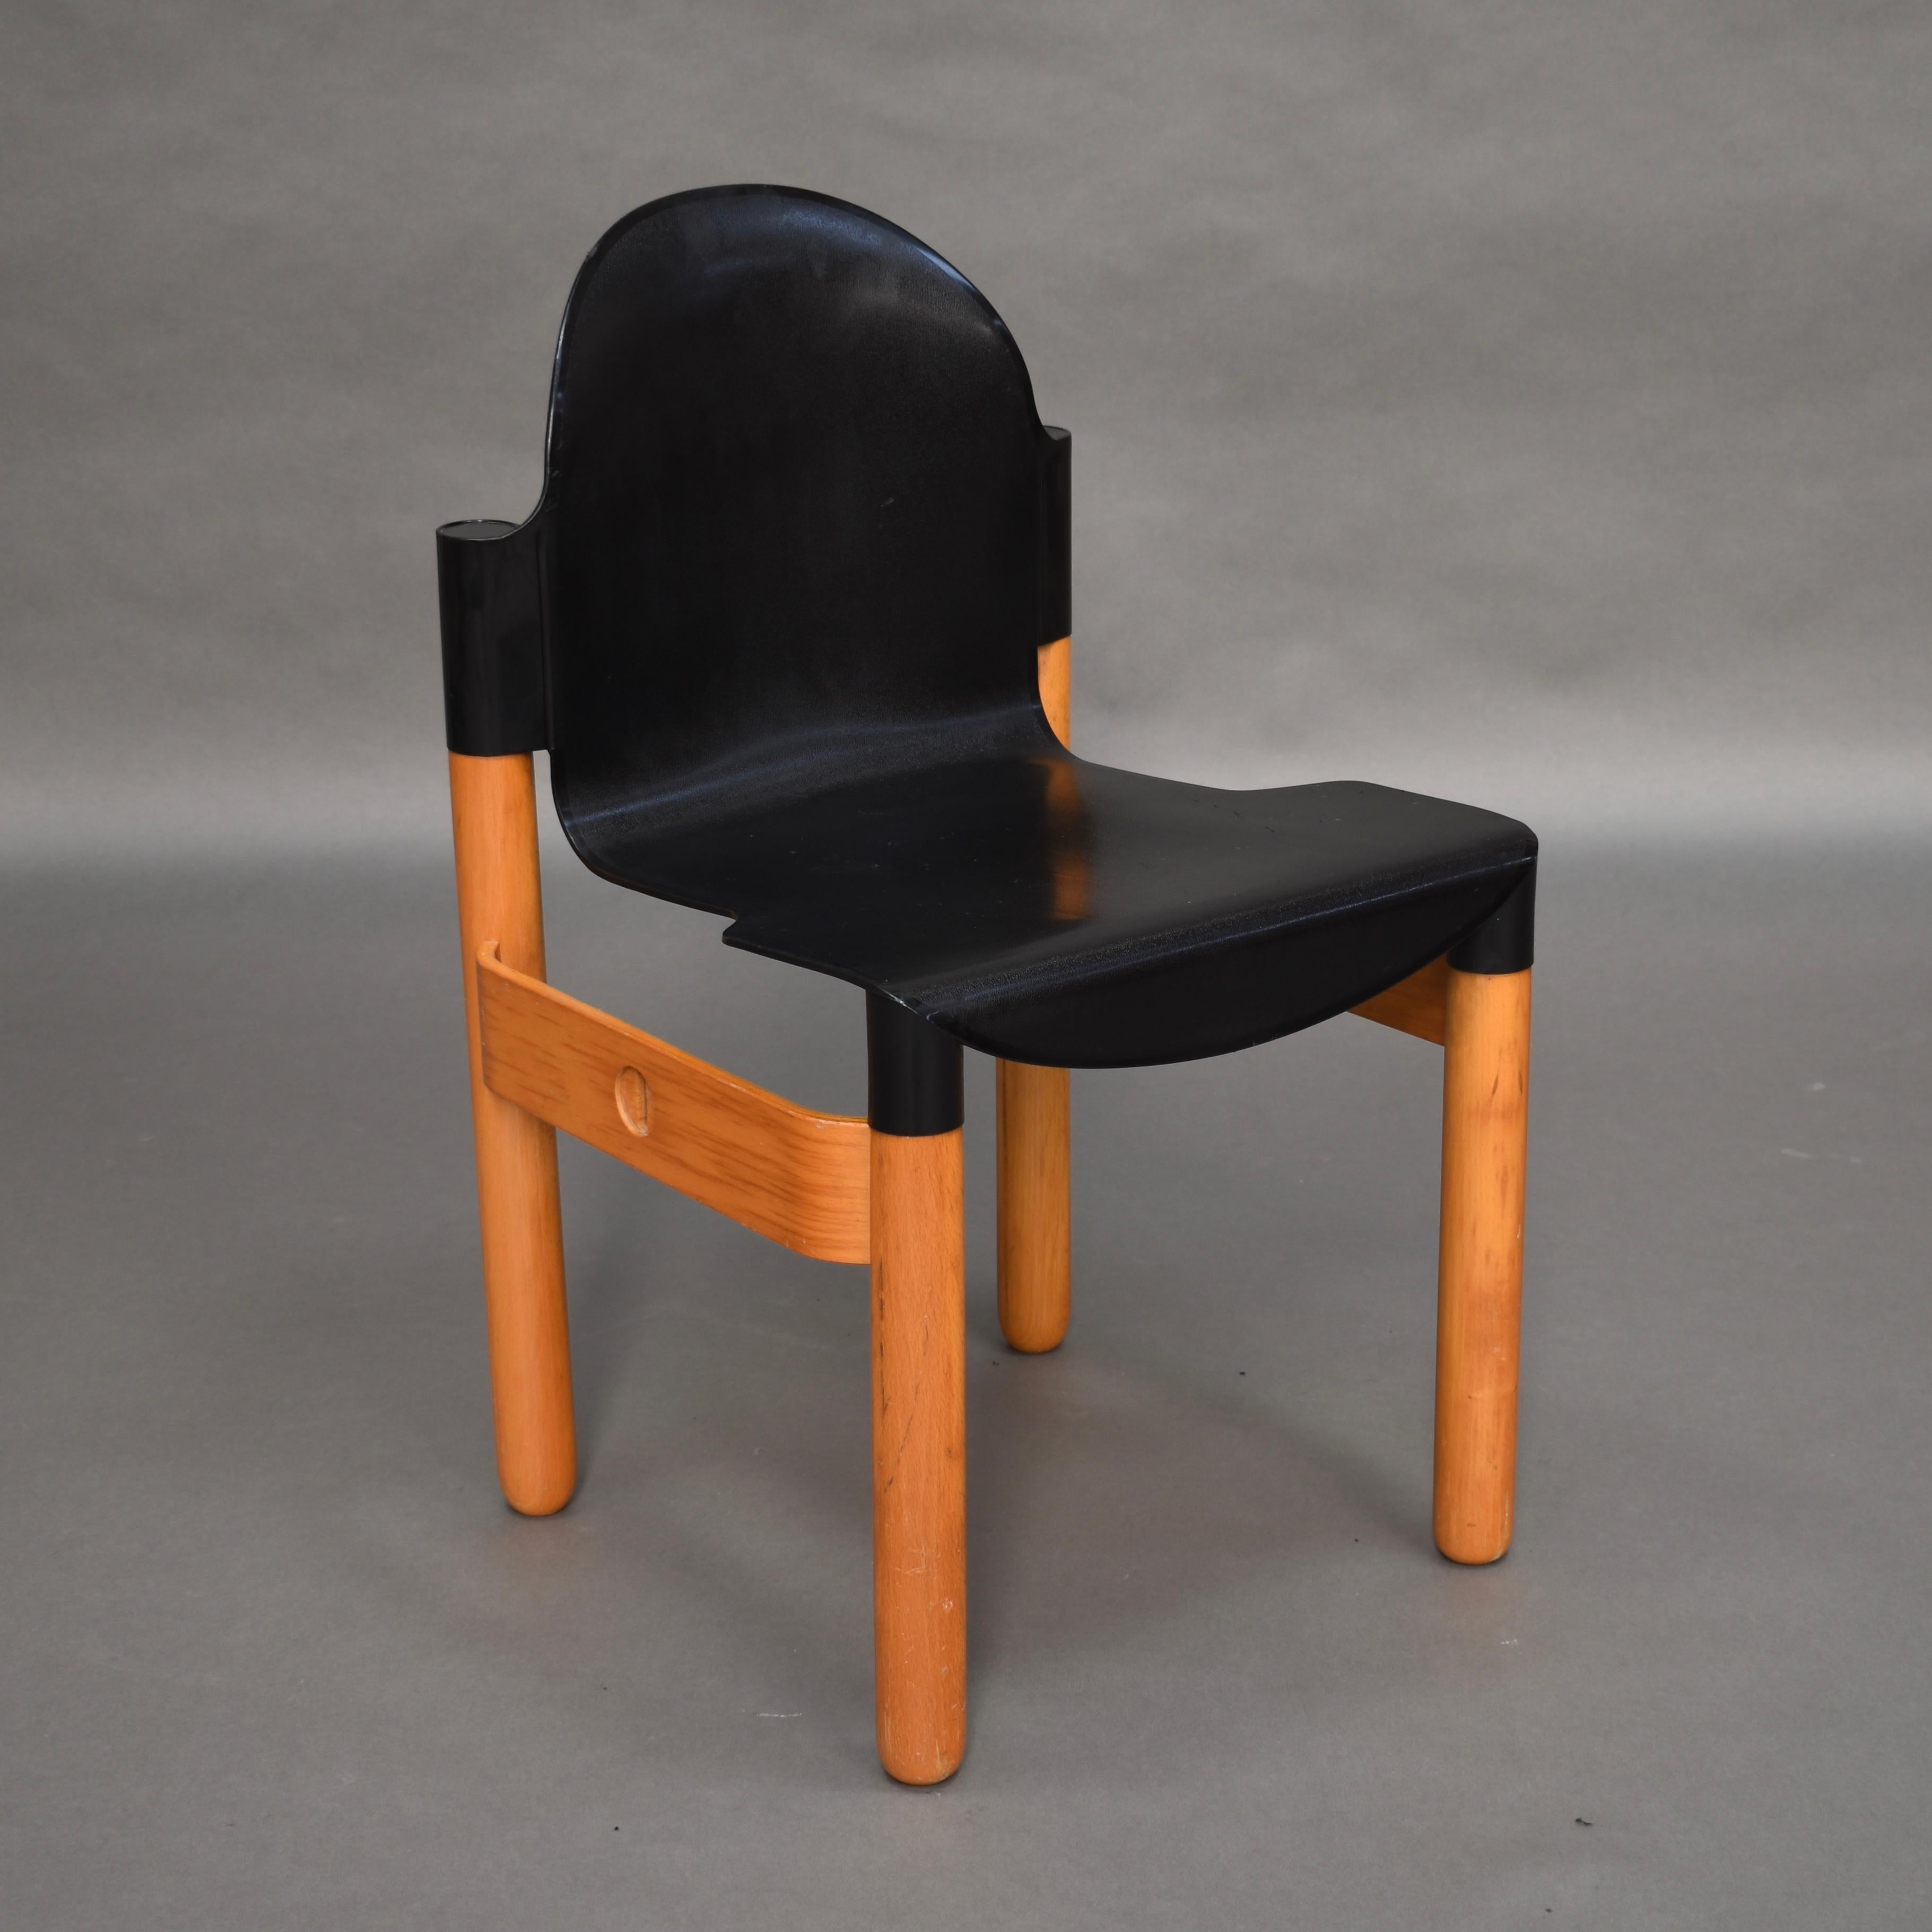 Thonet Chair in Birch and Plastic by Gerd Lange, West-Germany, 1973 For Sale 3